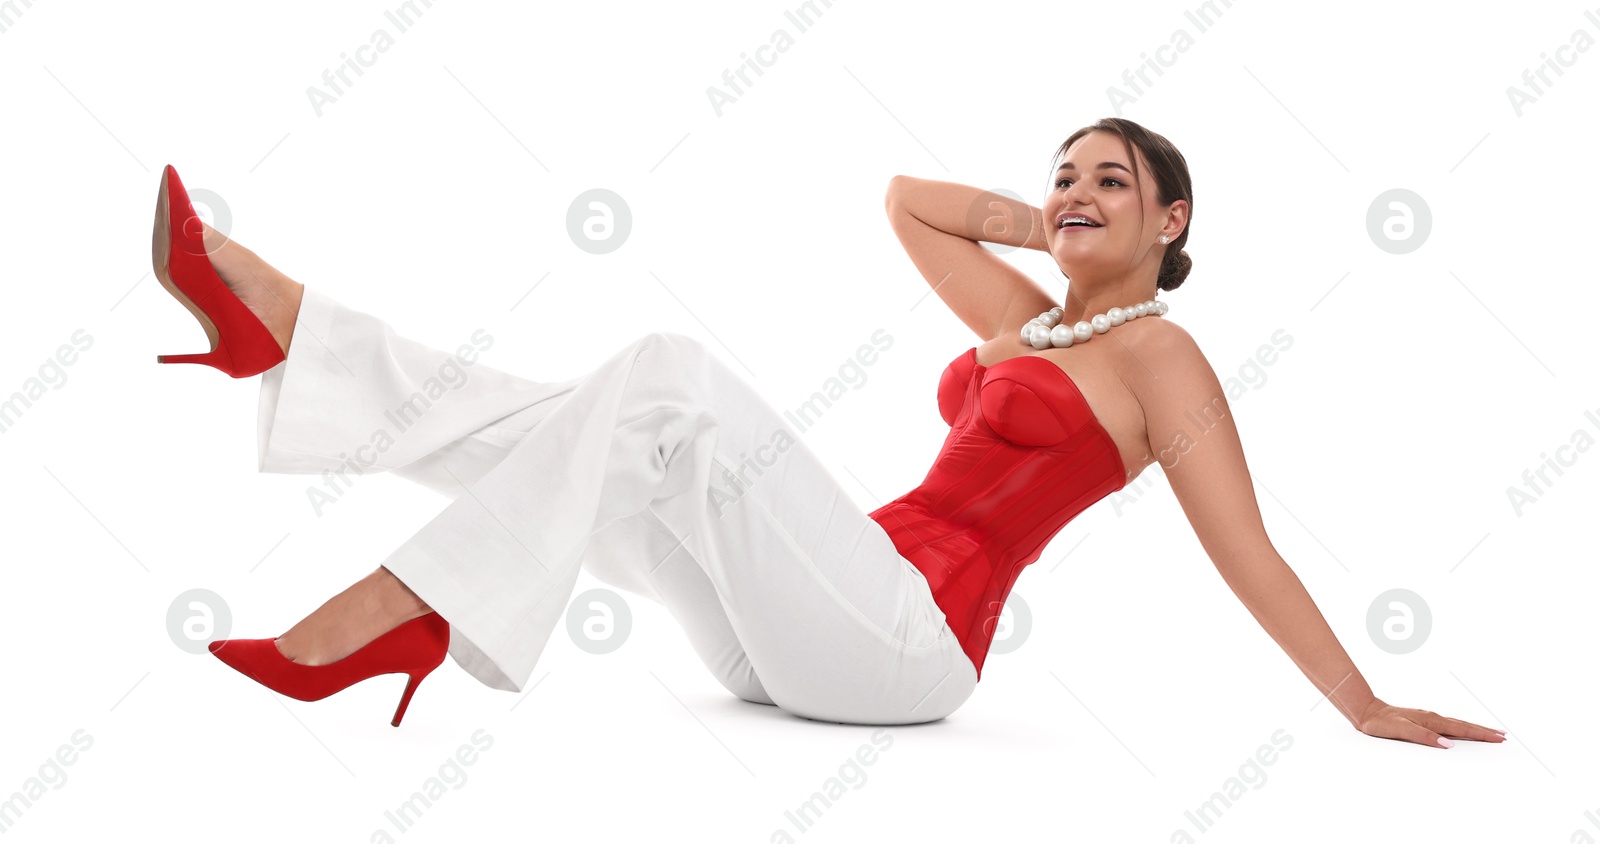 Photo of Smiling woman in red corset posing on white background